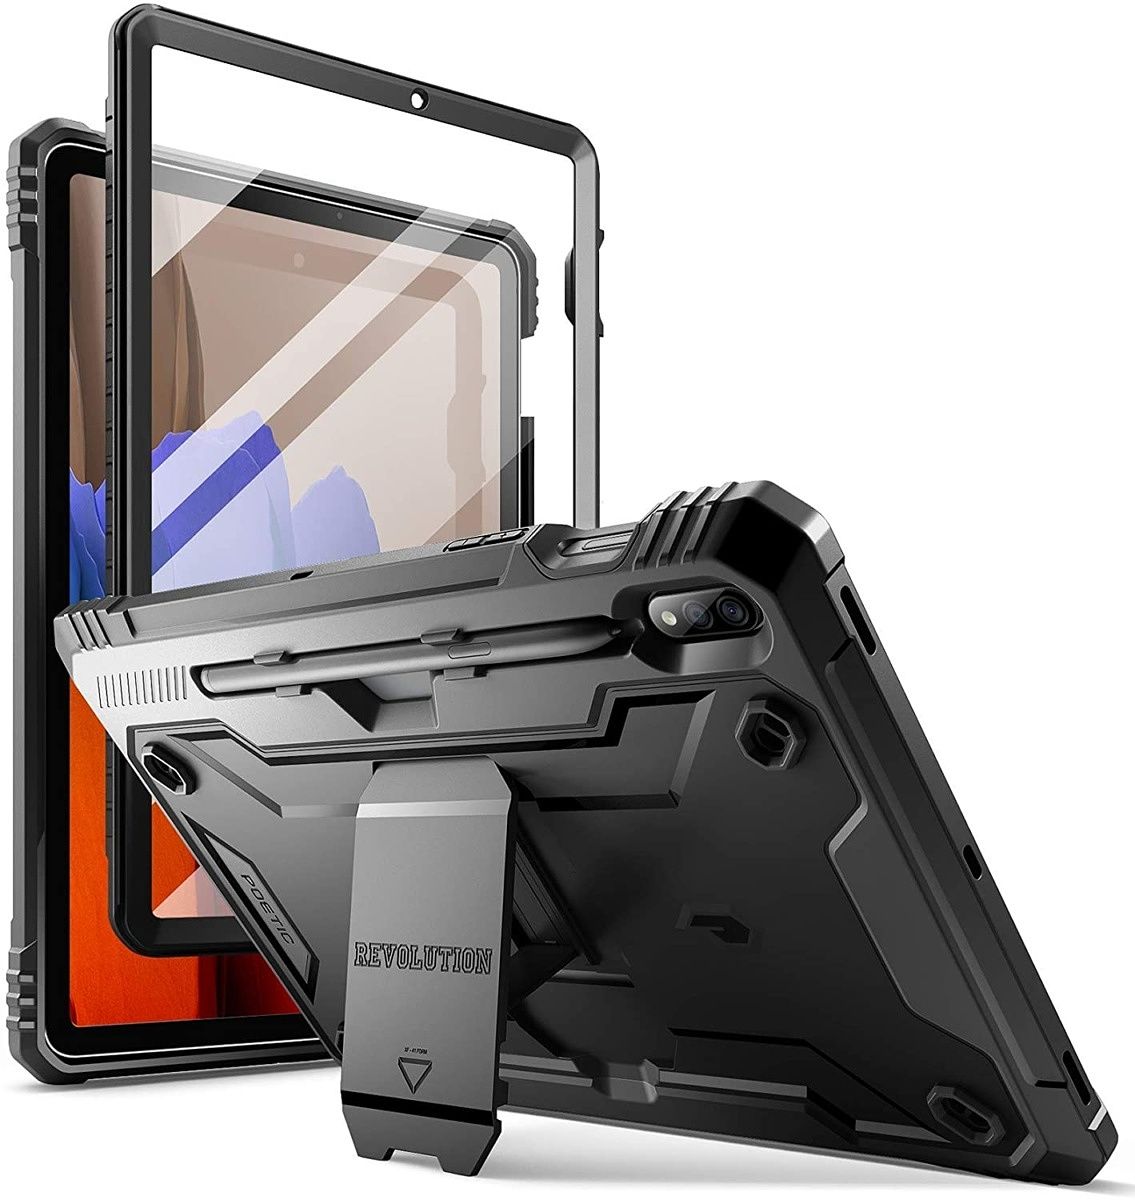 This heavily rugged case is available in Black, Blue, and Pink. It also has a built-in screen protector, making it ideal for rough environments.